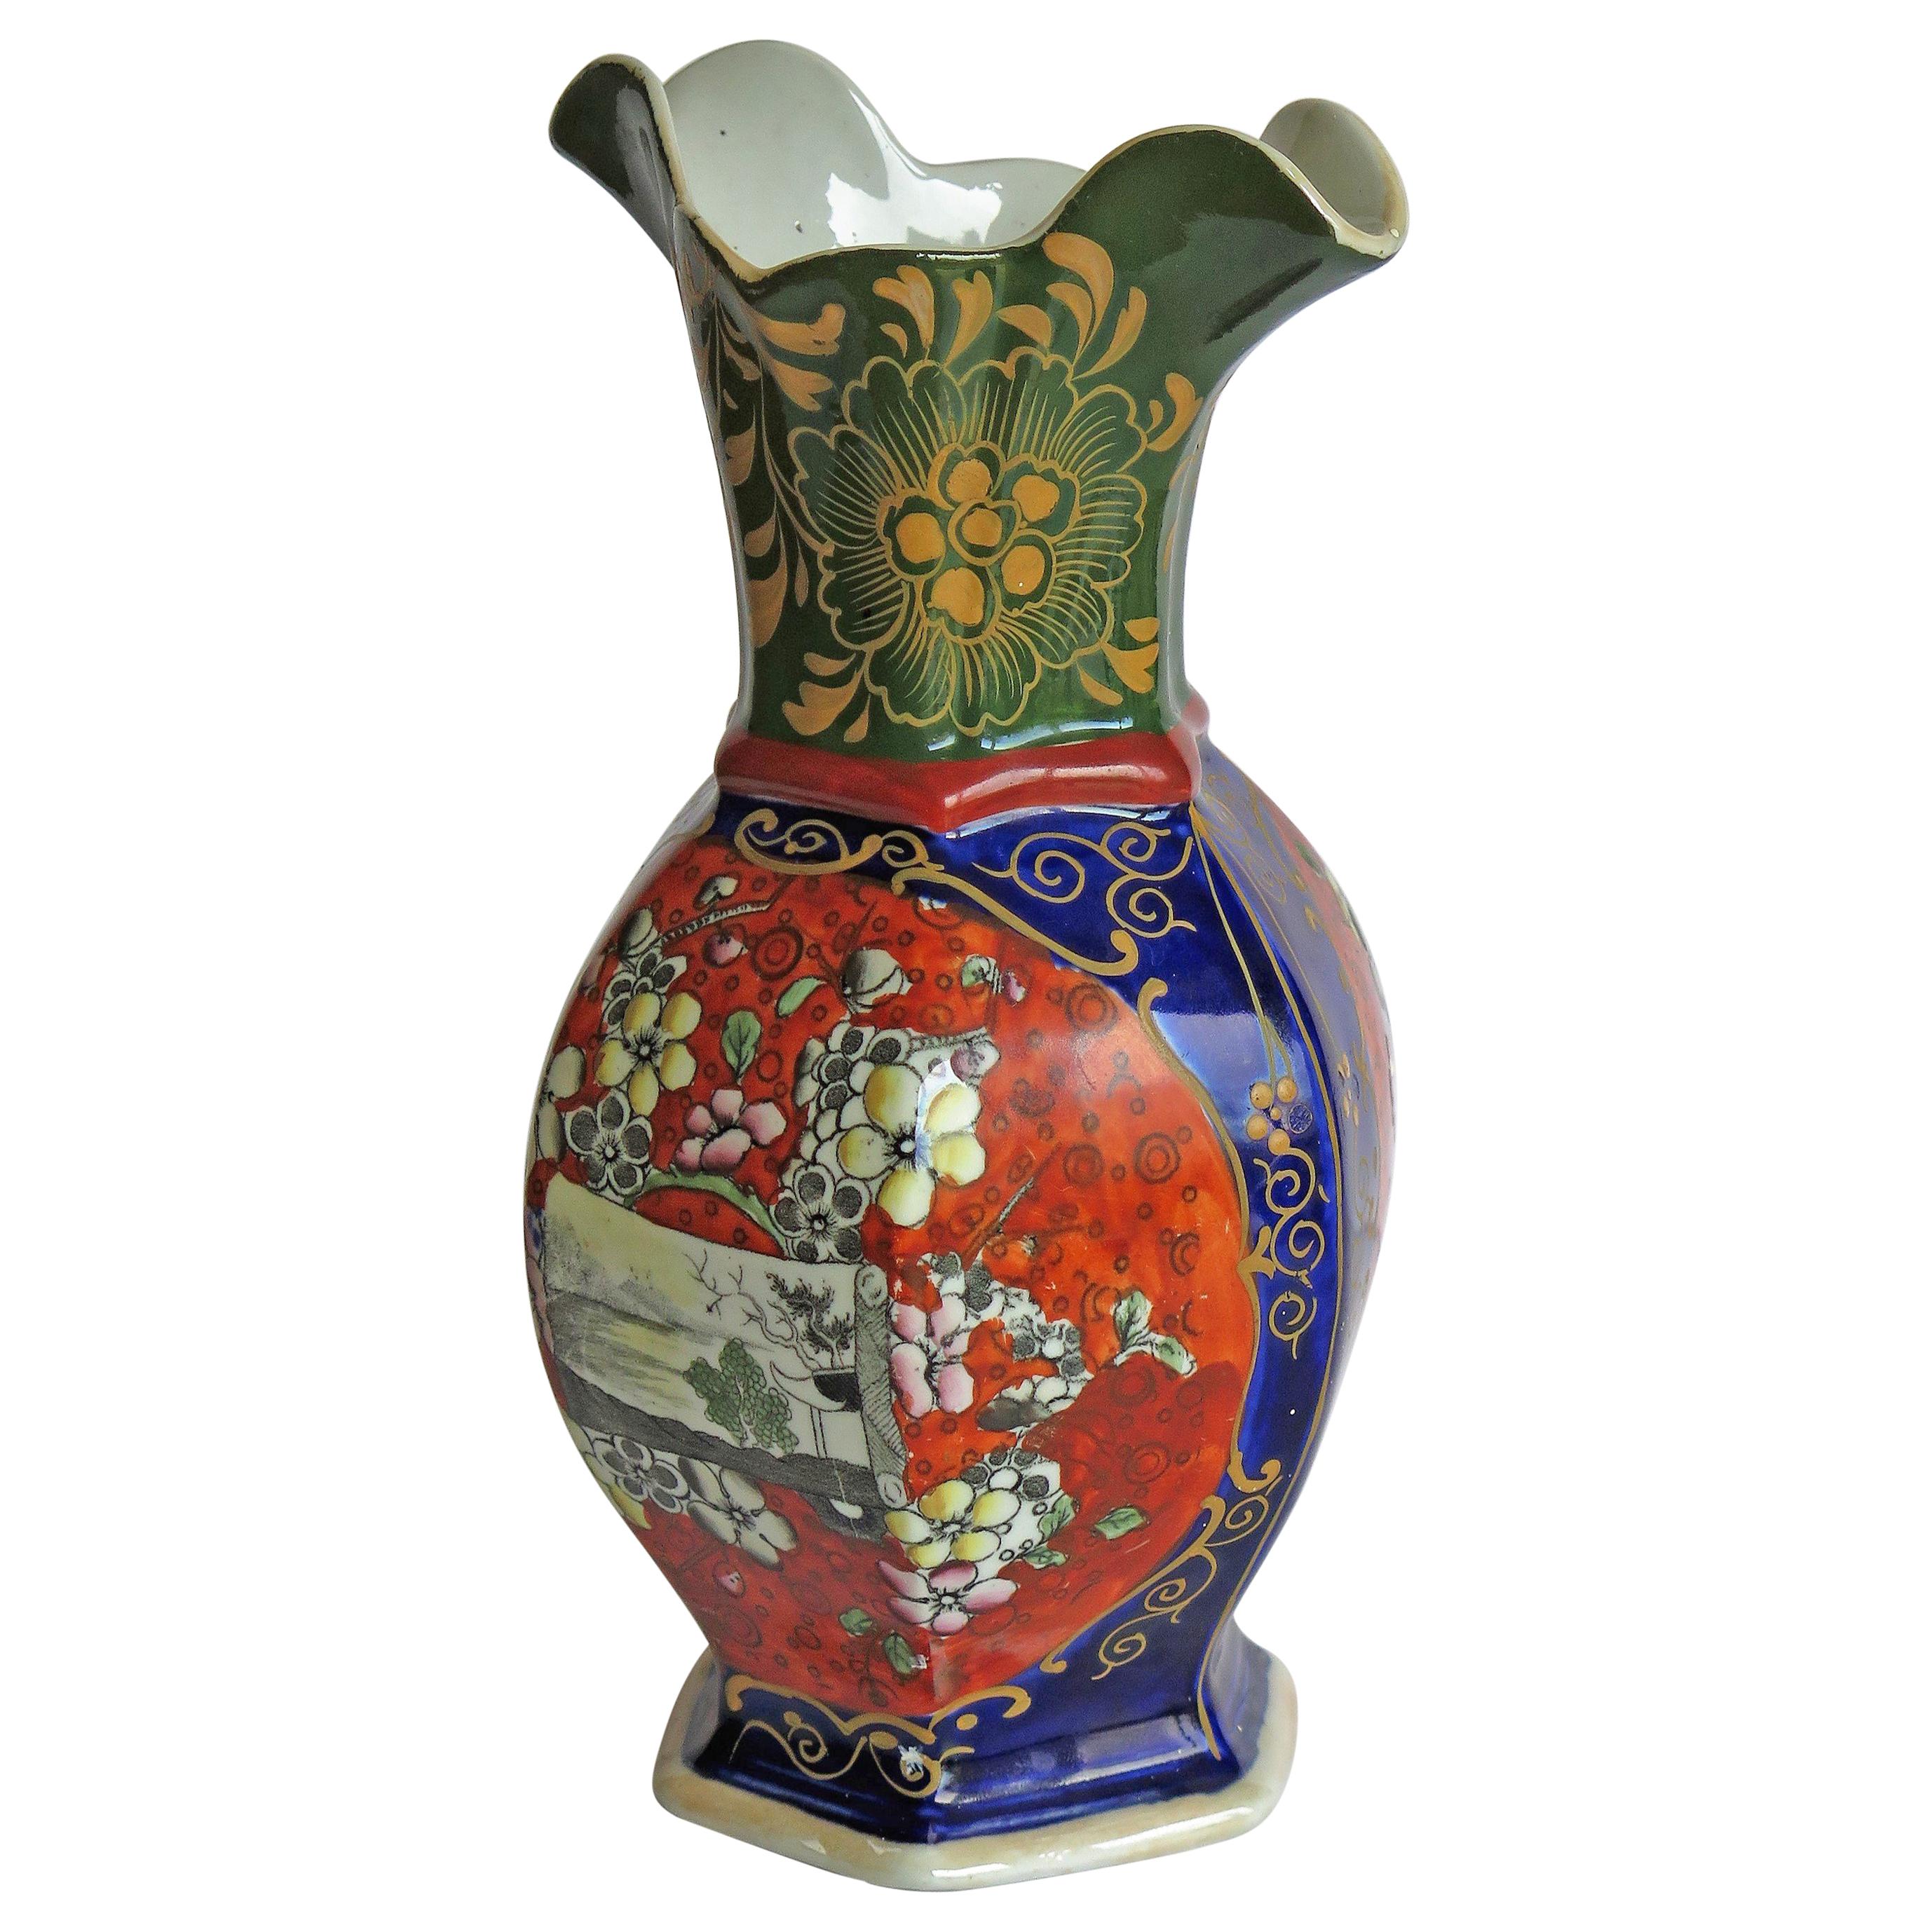 Mason's Ironstone Vase Hand Painted in Landscape and Prunus Pattern, circa 1830